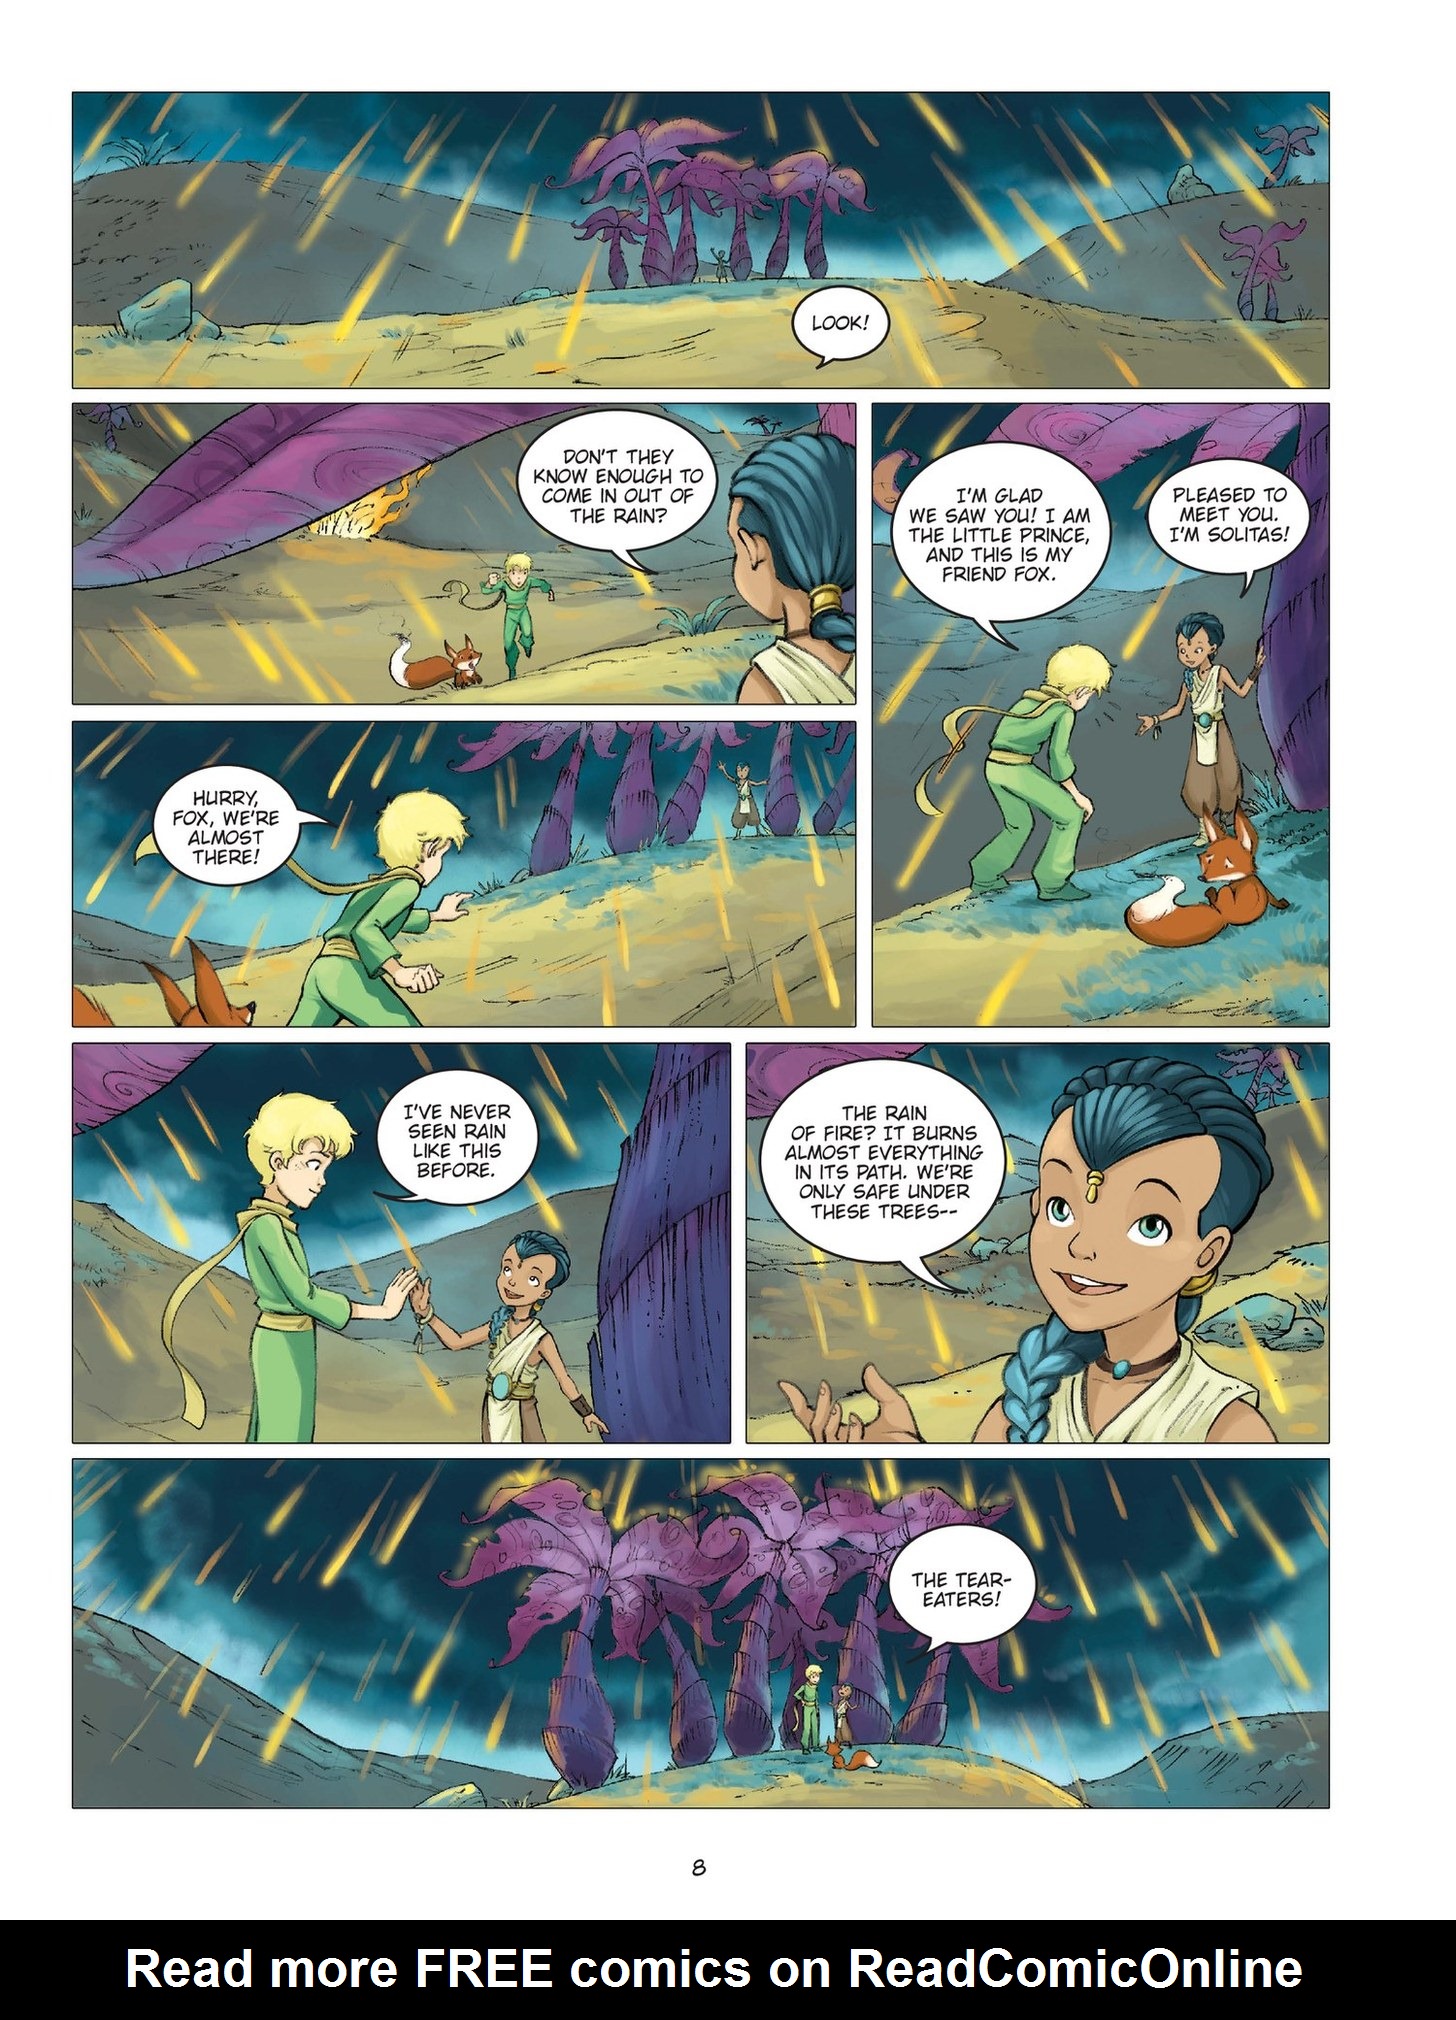 Read online The Little Prince comic -  Issue #13 - 12